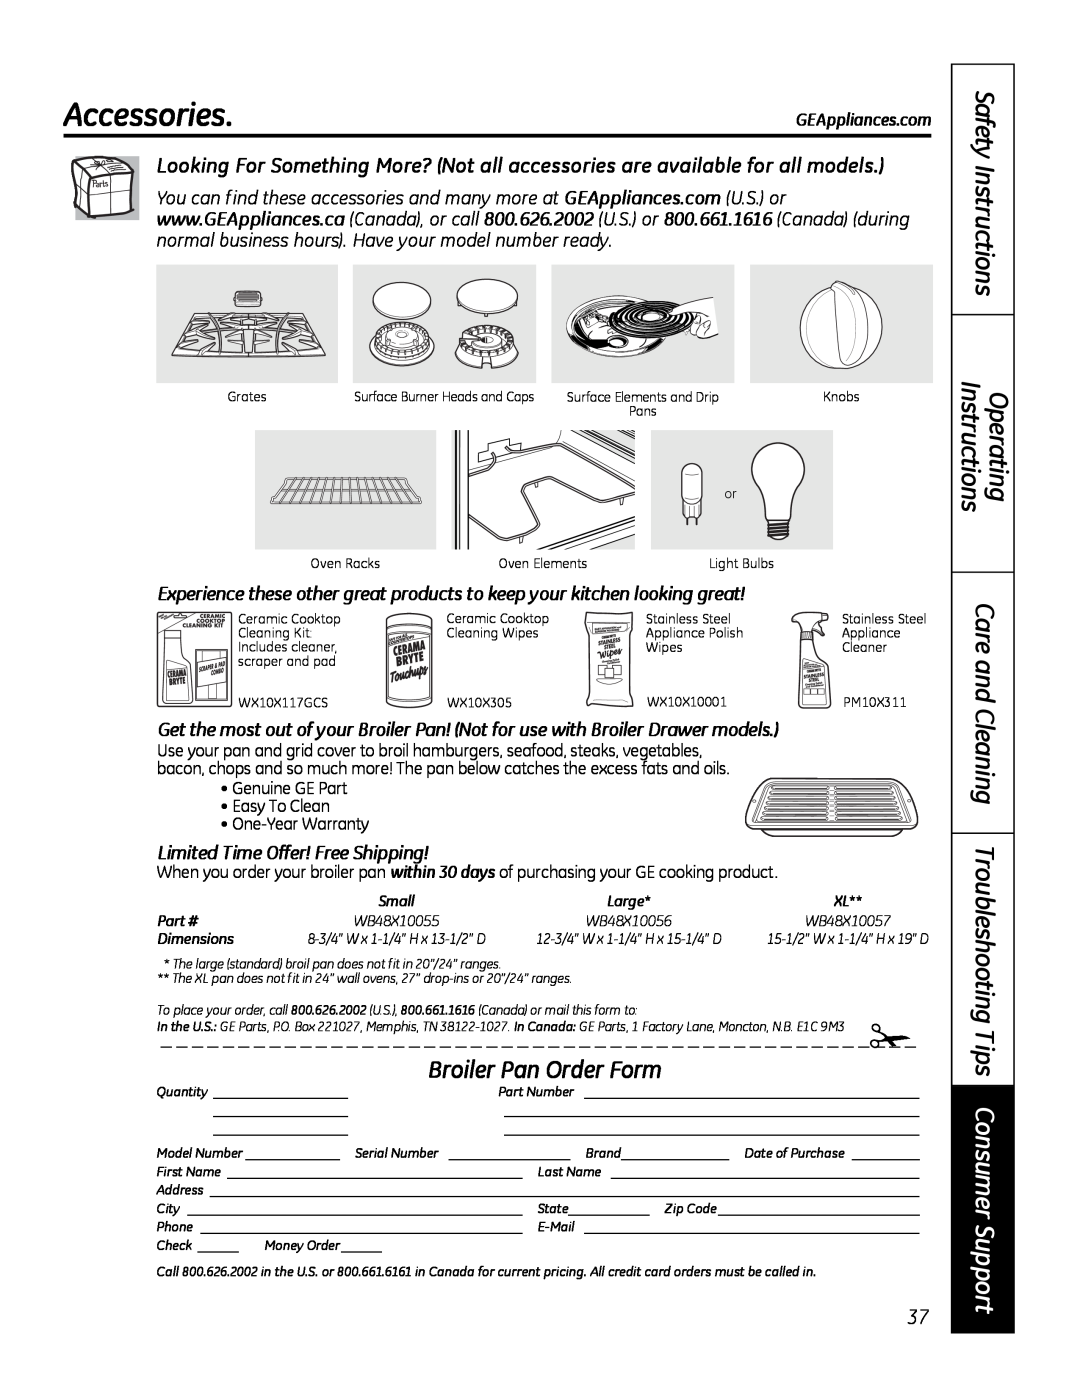 GE 49-80591-2, JBP28DRCC owner manual Accessories, Broiler Pan Order Form, Safety Instructions Operating Instructions 